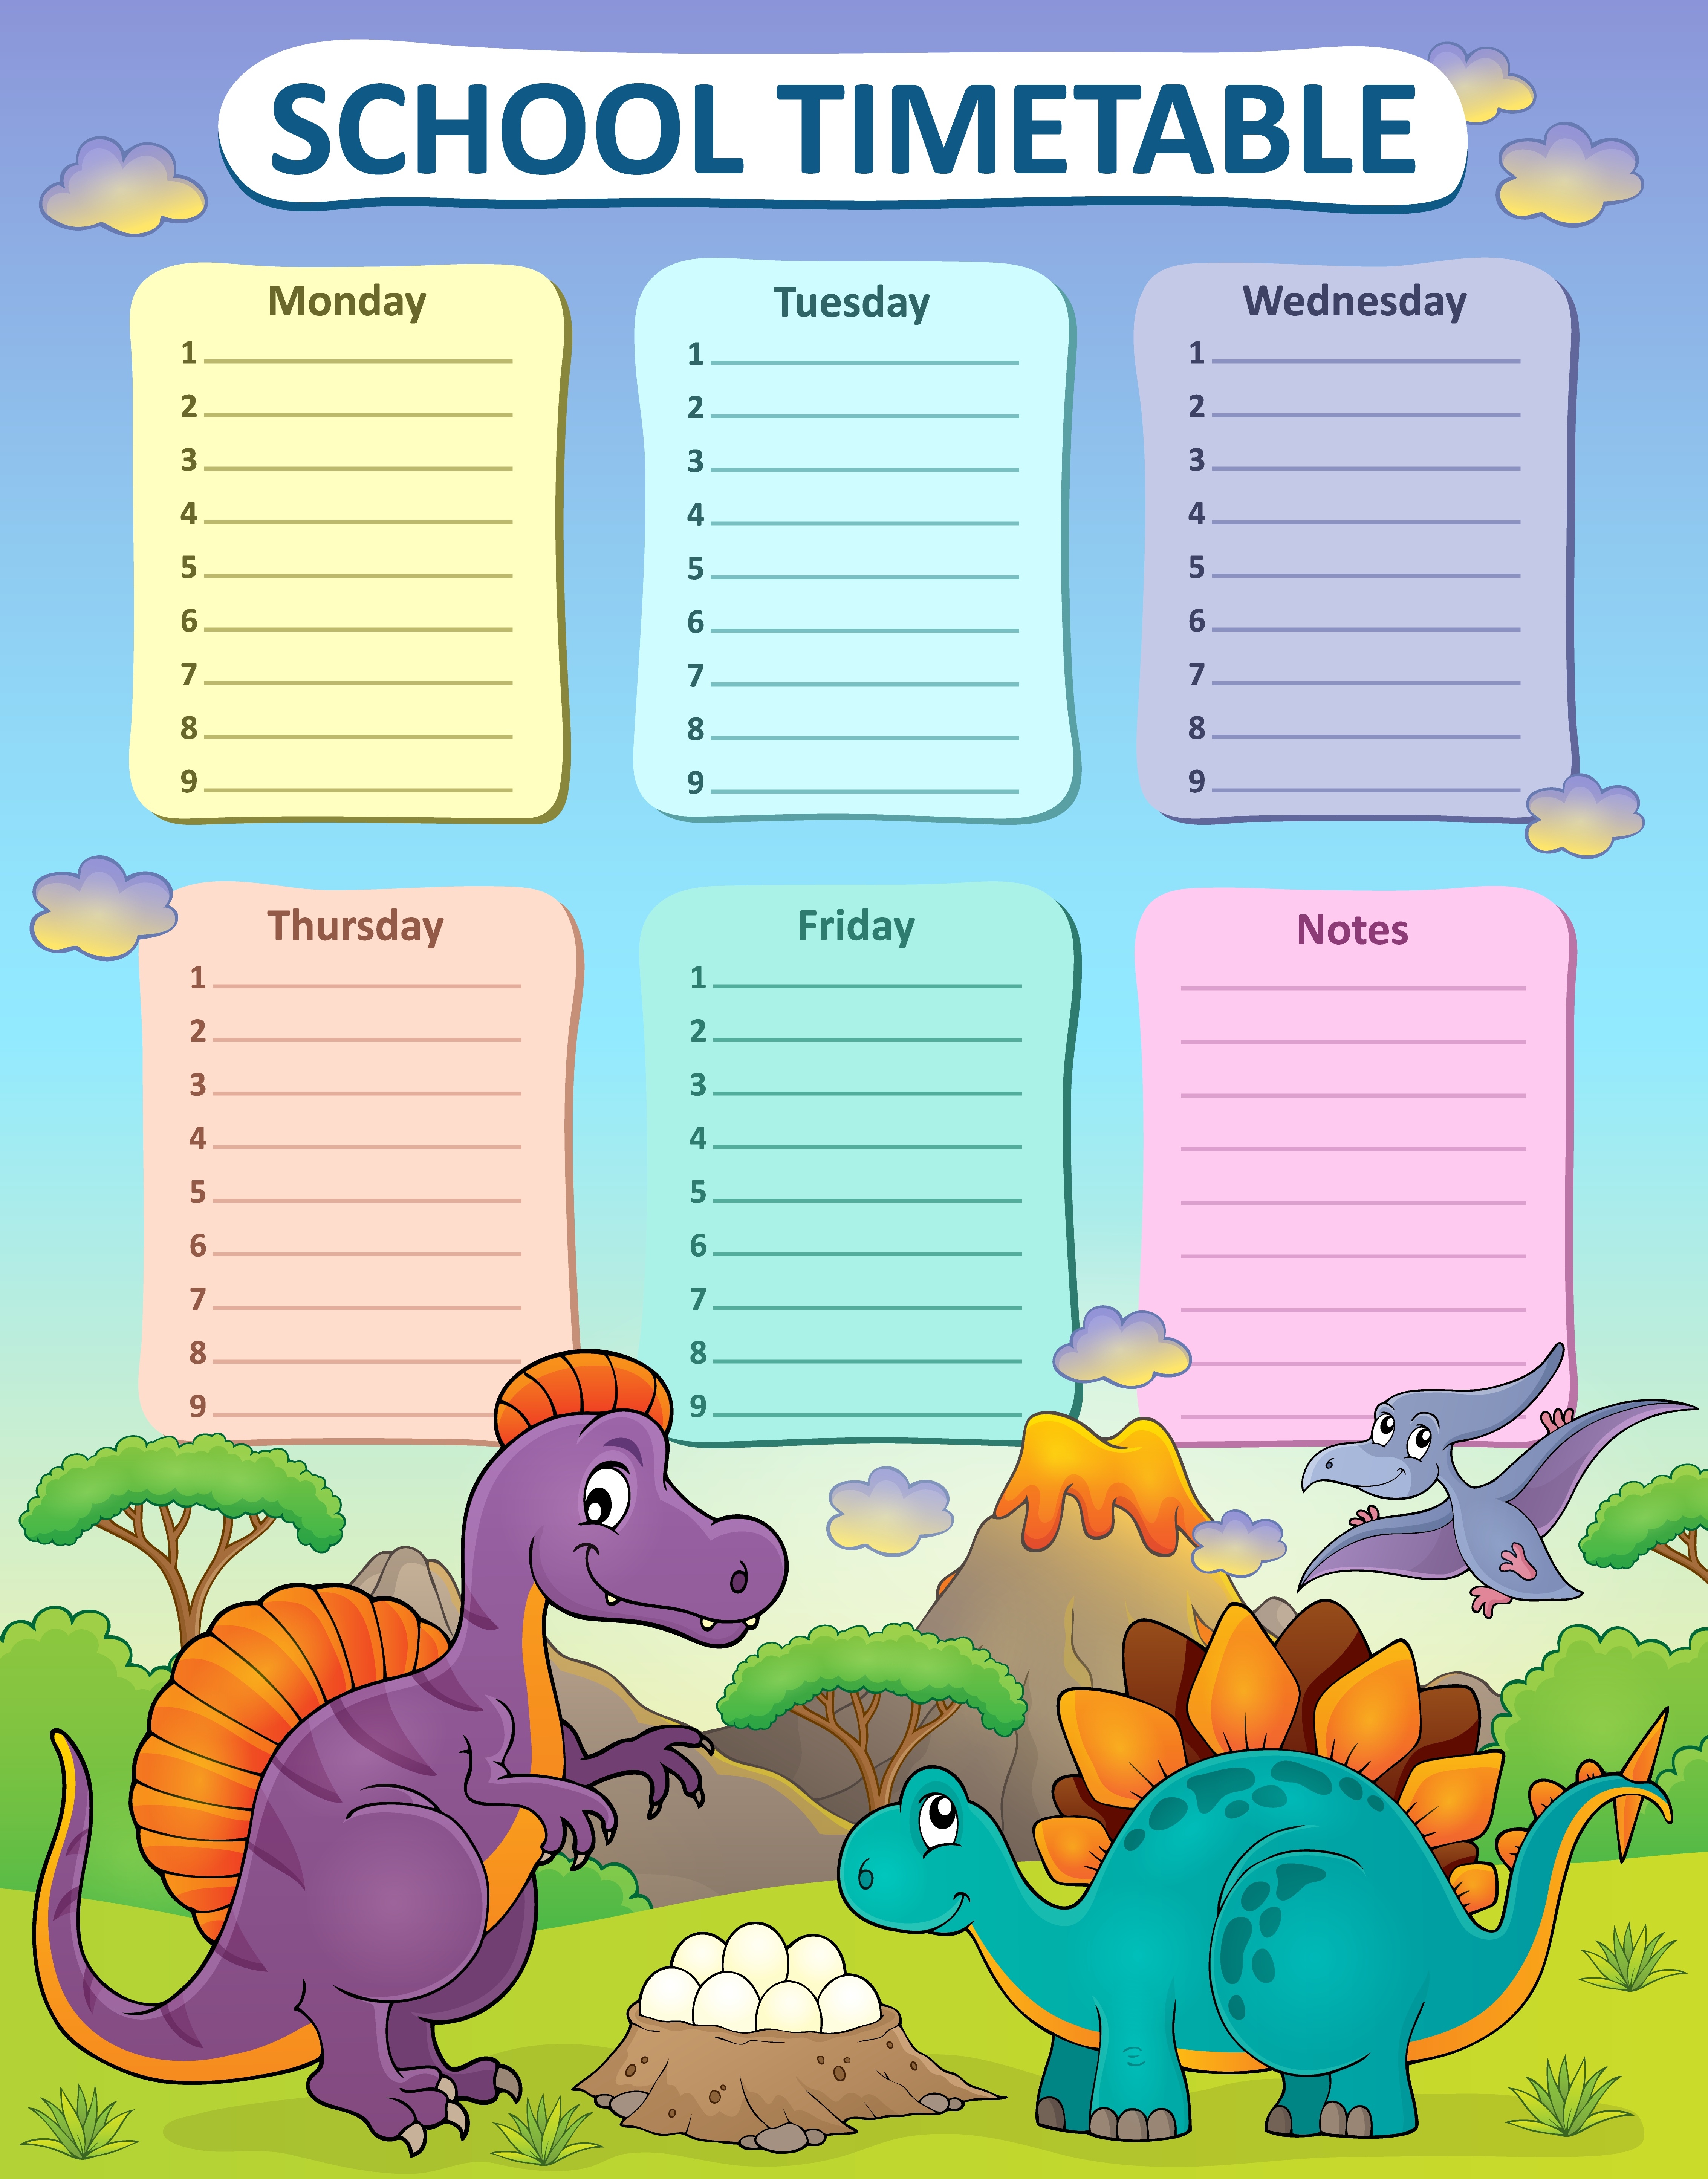 Weekly school timetable thematics 2 - eps10 vector illustration.